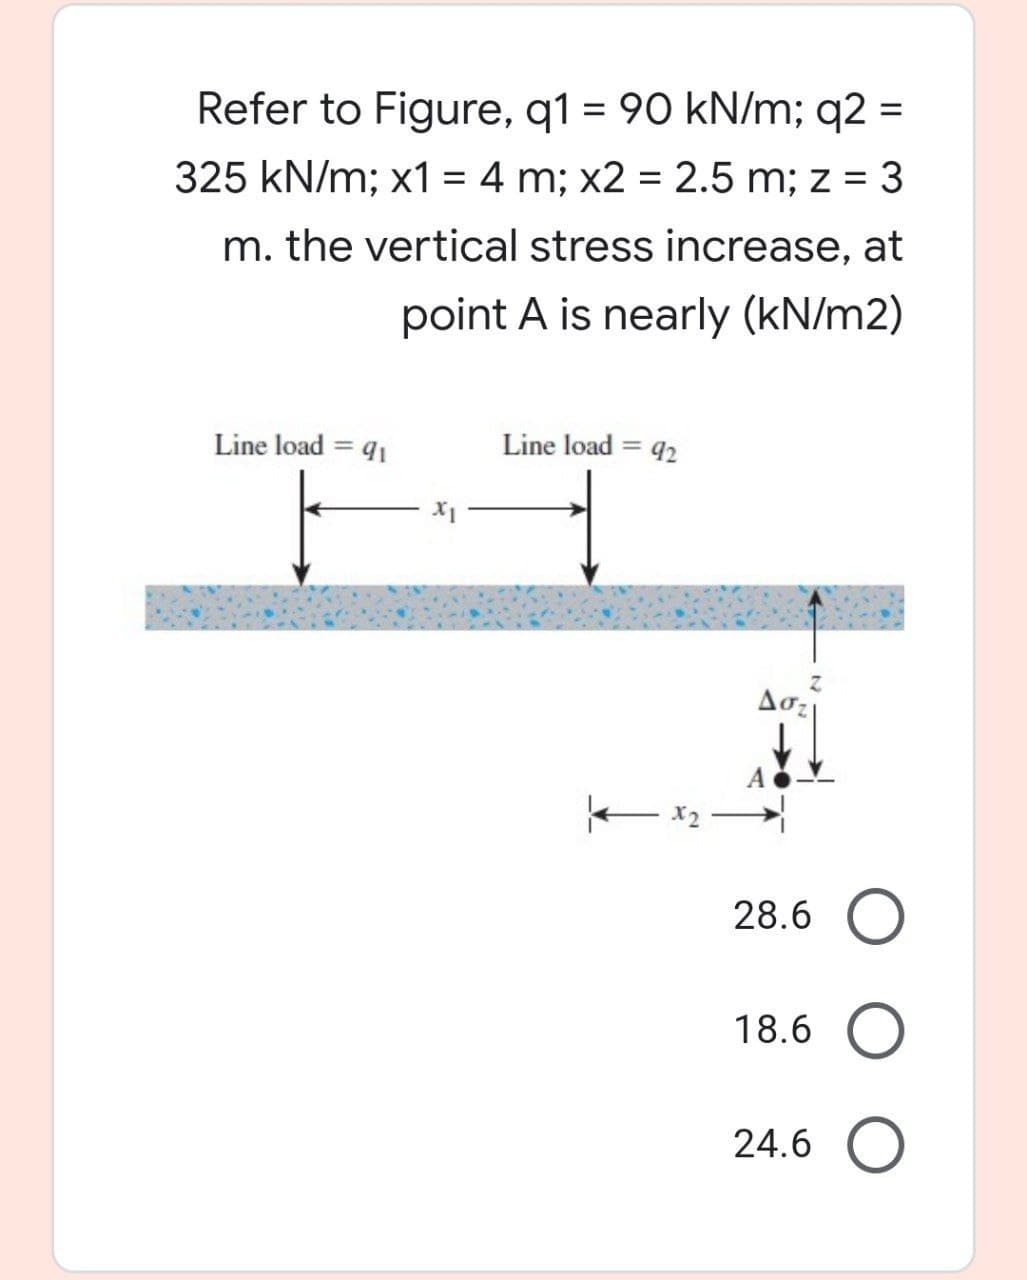 Refer to Figure, q1 = 90 kN/m; q2 =
%3D
325 kN/m; x1 = 4 m; x2 = 2.5 m; z = 3
%3D
m. the vertical stress increase, at
point A is nearly (kN/m2)
Line load = 91
Line load = 92
- x2
28.6
18.6
24.6
